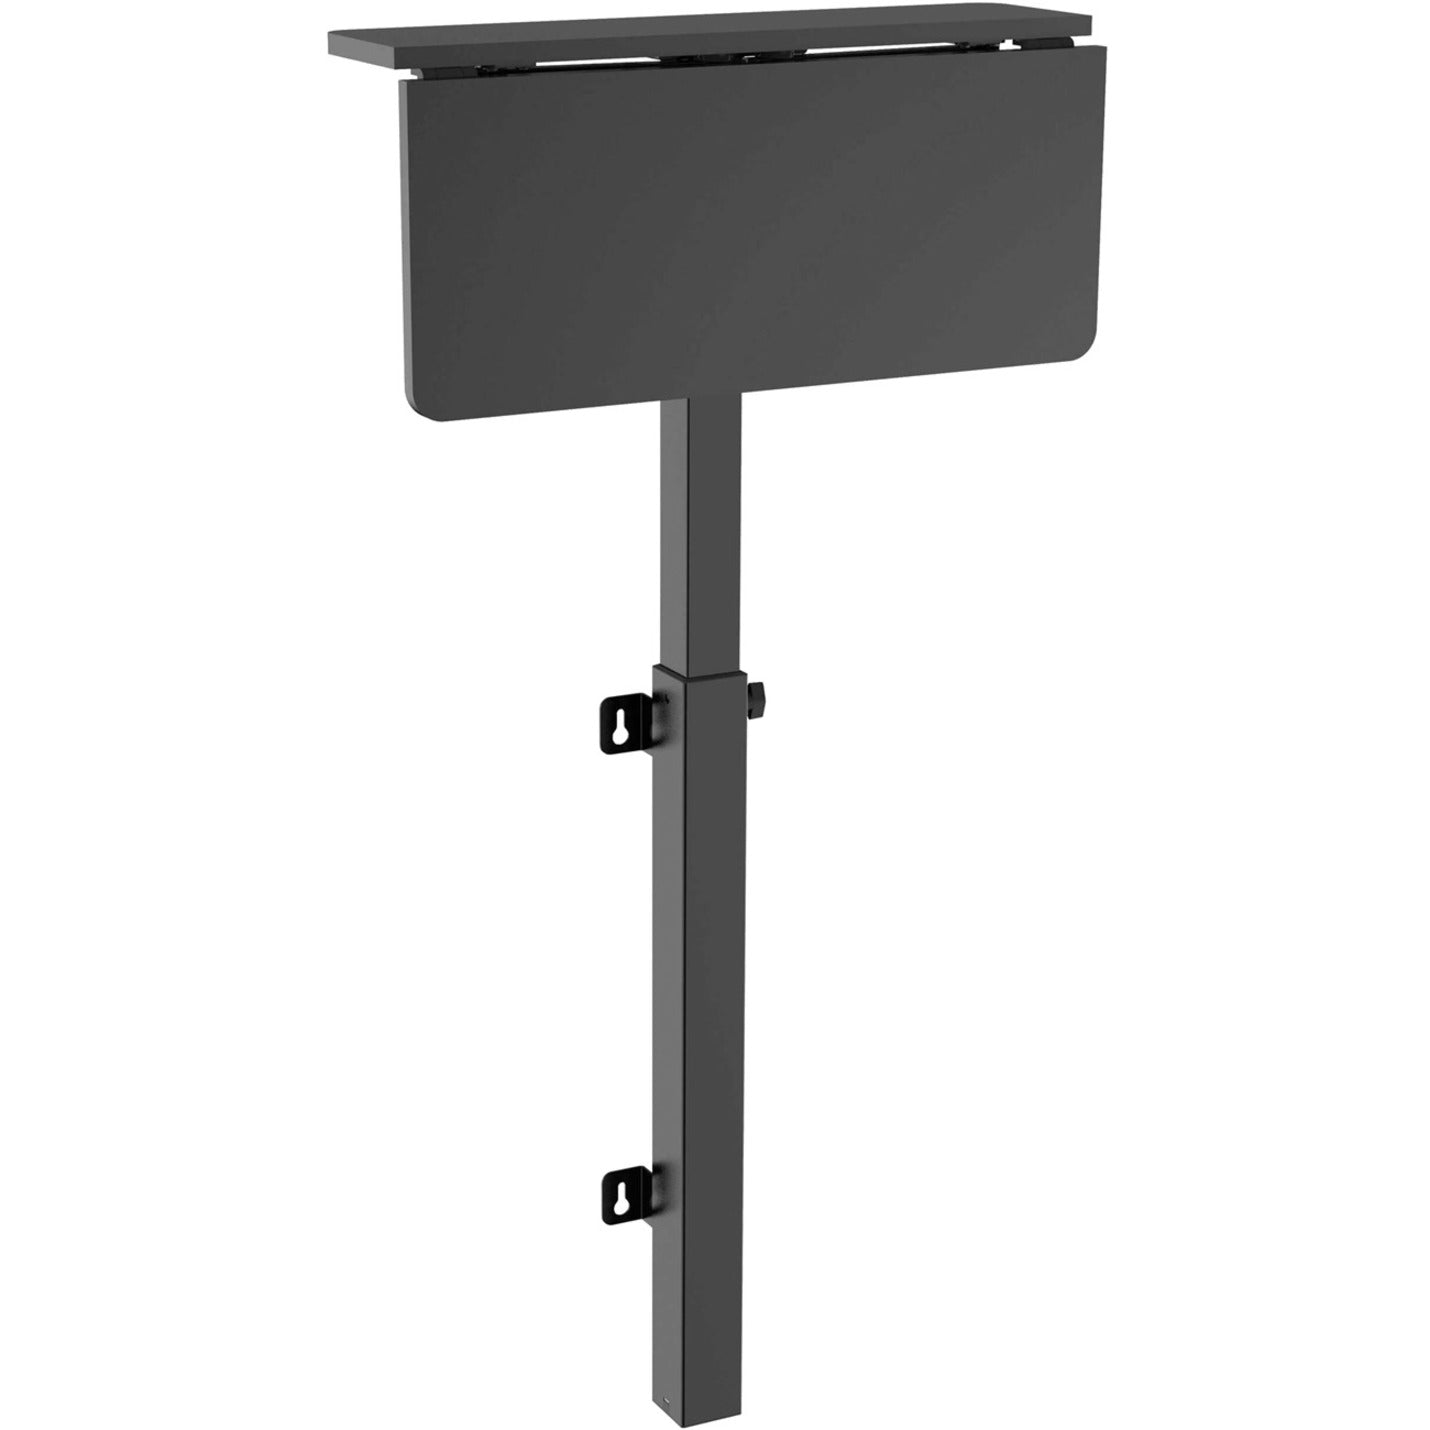 Tripp Lite WWSSFDSAM Safe-IT Adjustable-Height Wall-Mount Workstation, Antimicrobial Protection, Ergonomic, 22 lb Maximum Load Capacity